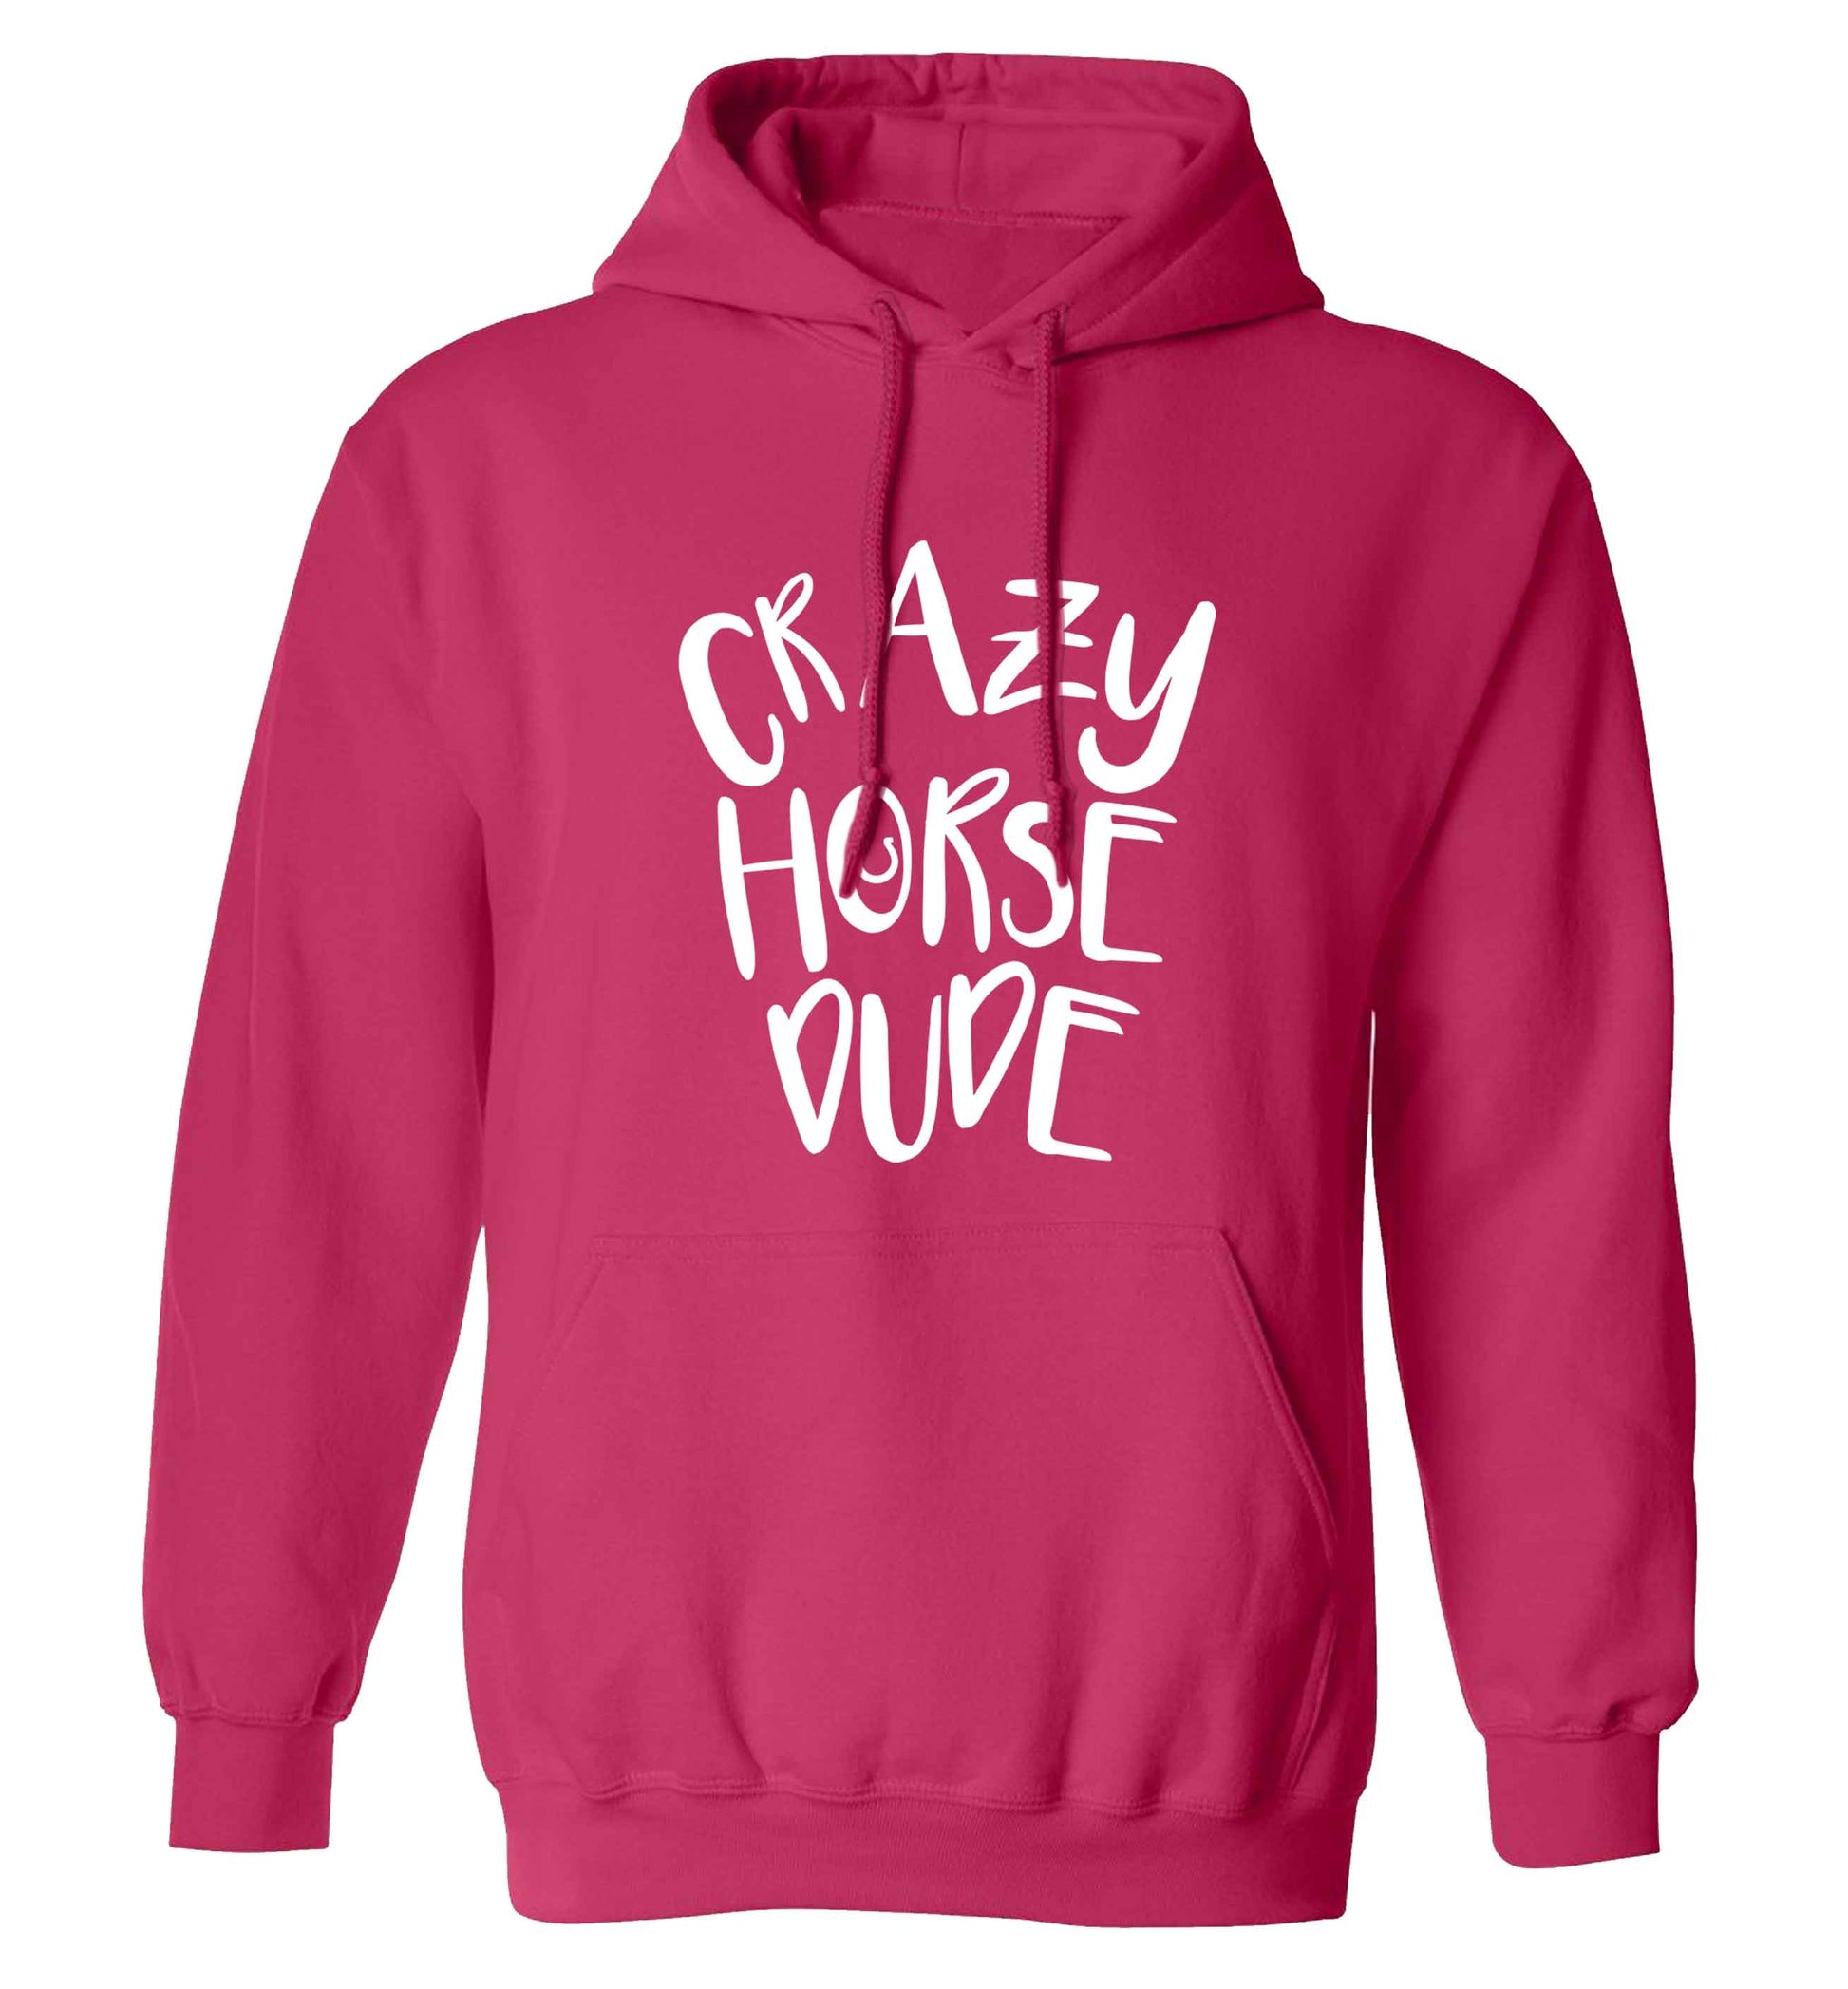 Crazy horse dude adults unisex pink hoodie 2XL